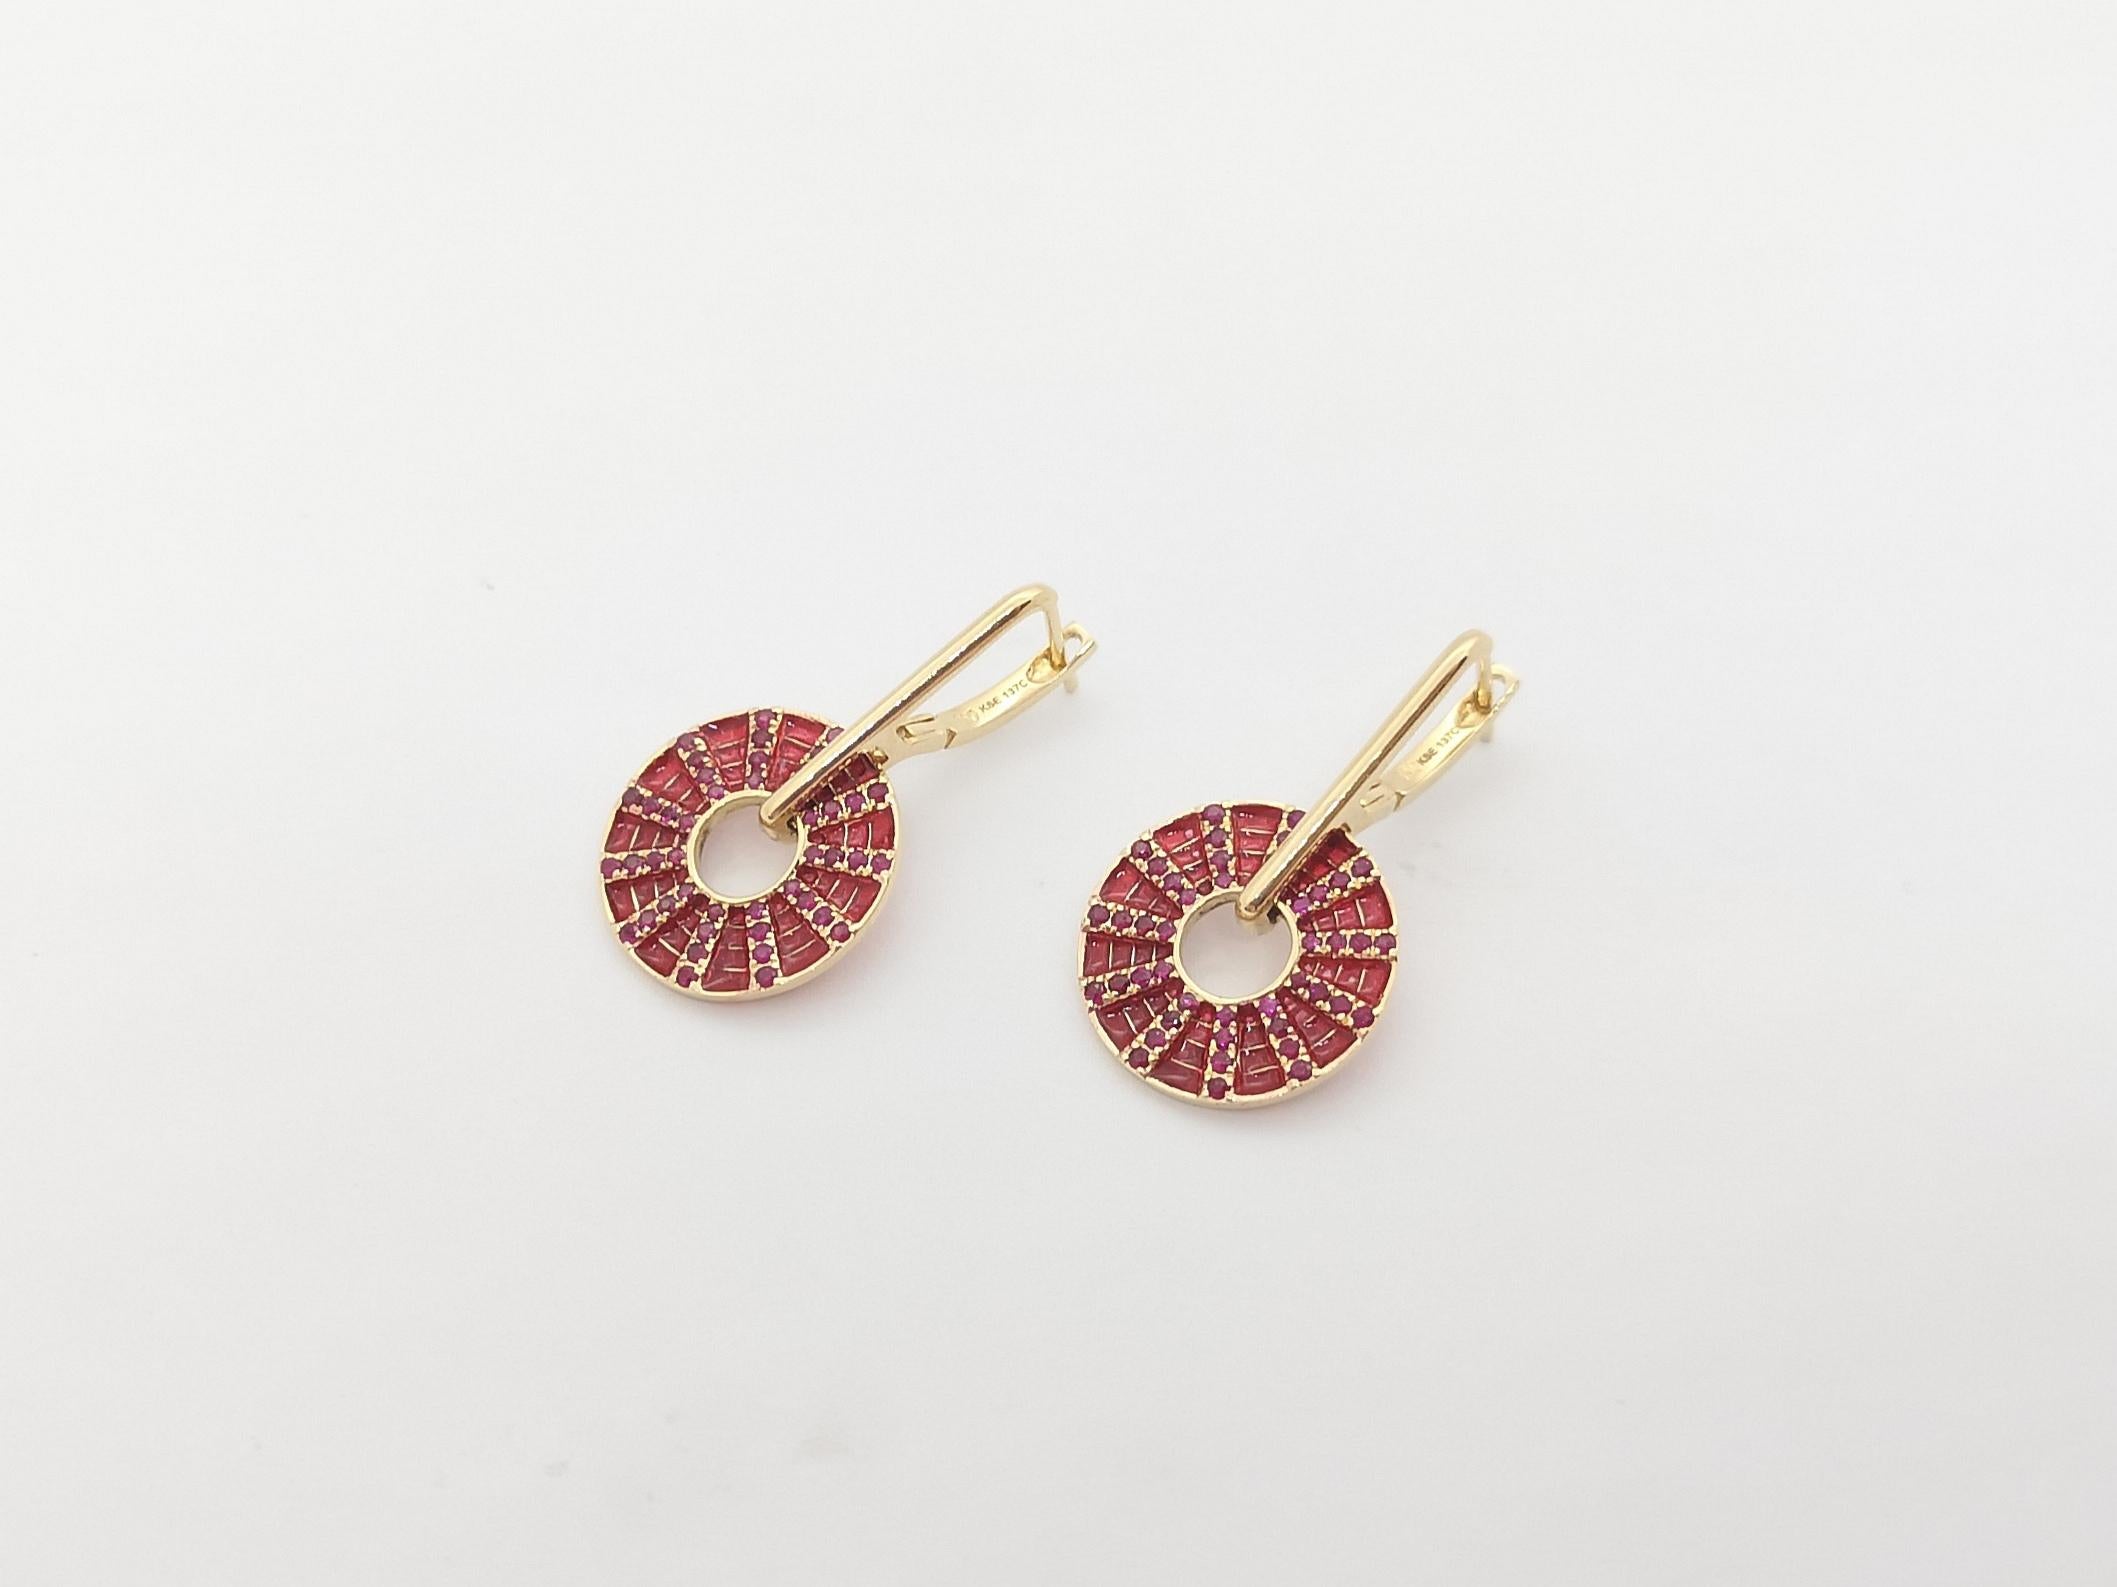 Ruby 0.71 carat and Enamel Earrings 18K Gold 

Width: 1.3 cm
Length: 1.6 cm
Weight: 3.07 grams

Inspired by the spirit of 